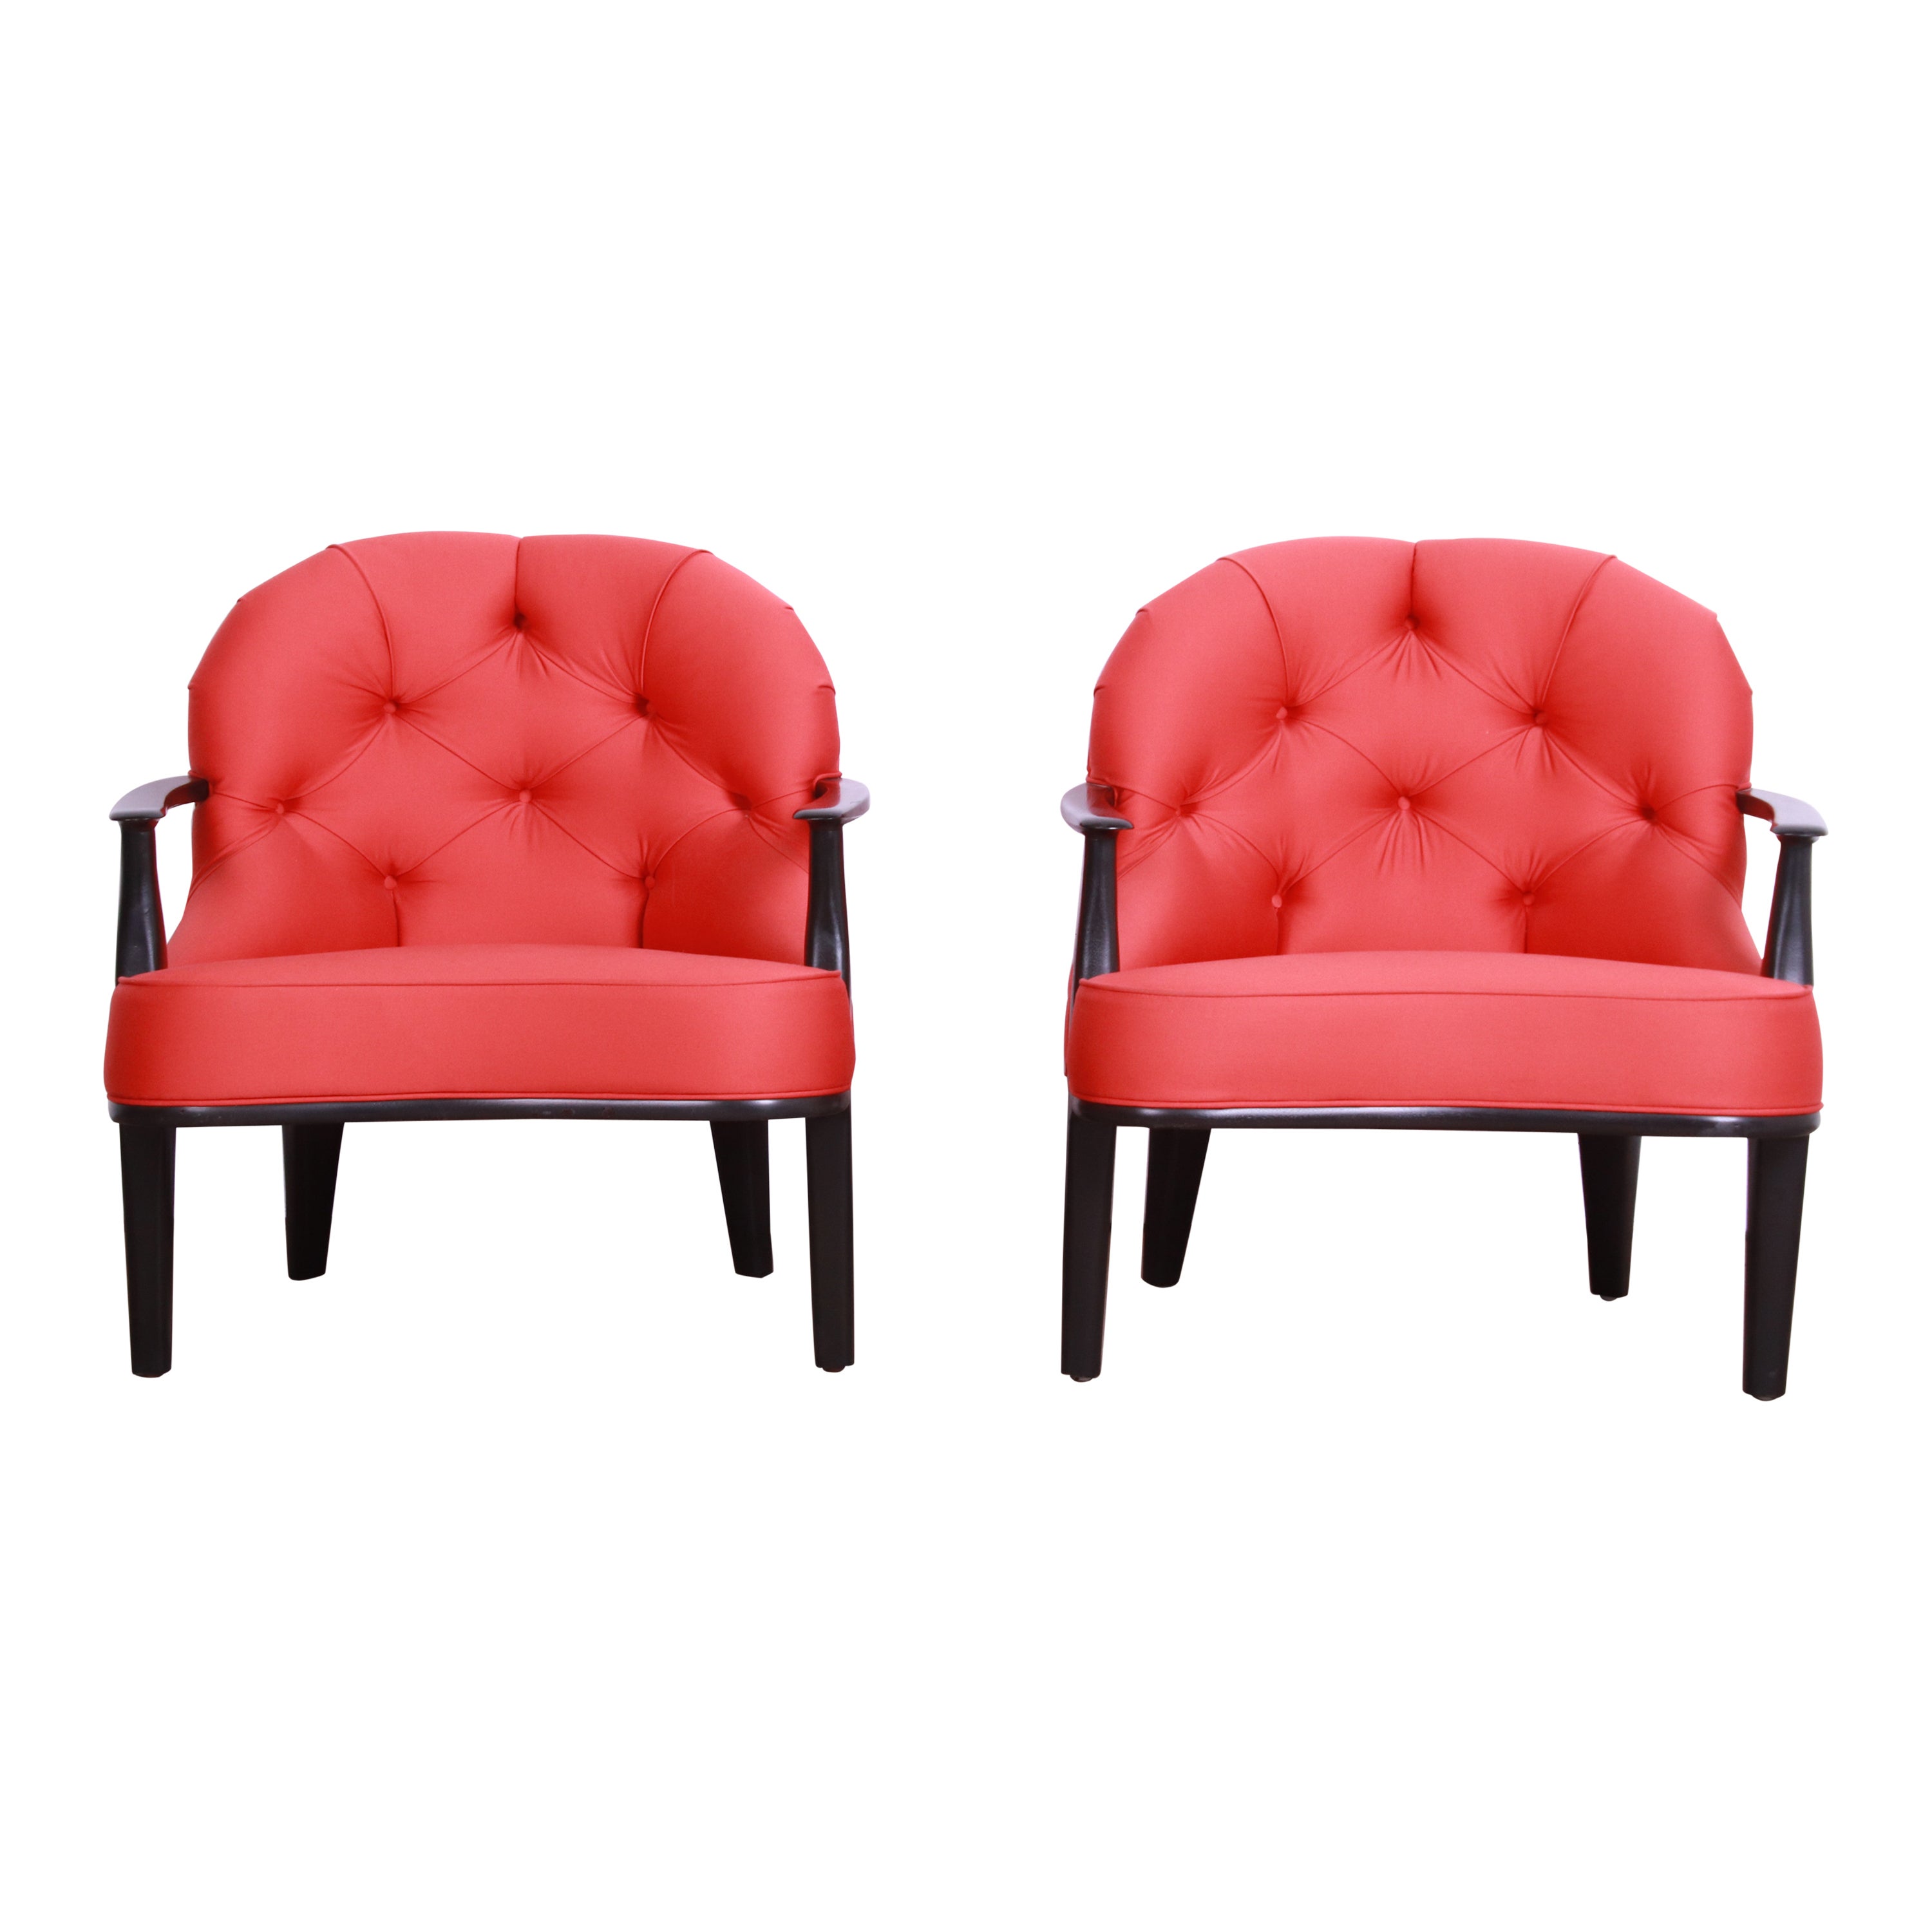 Edward Wormley for Dunbar Janus Collection Lounge Chairs, Pair